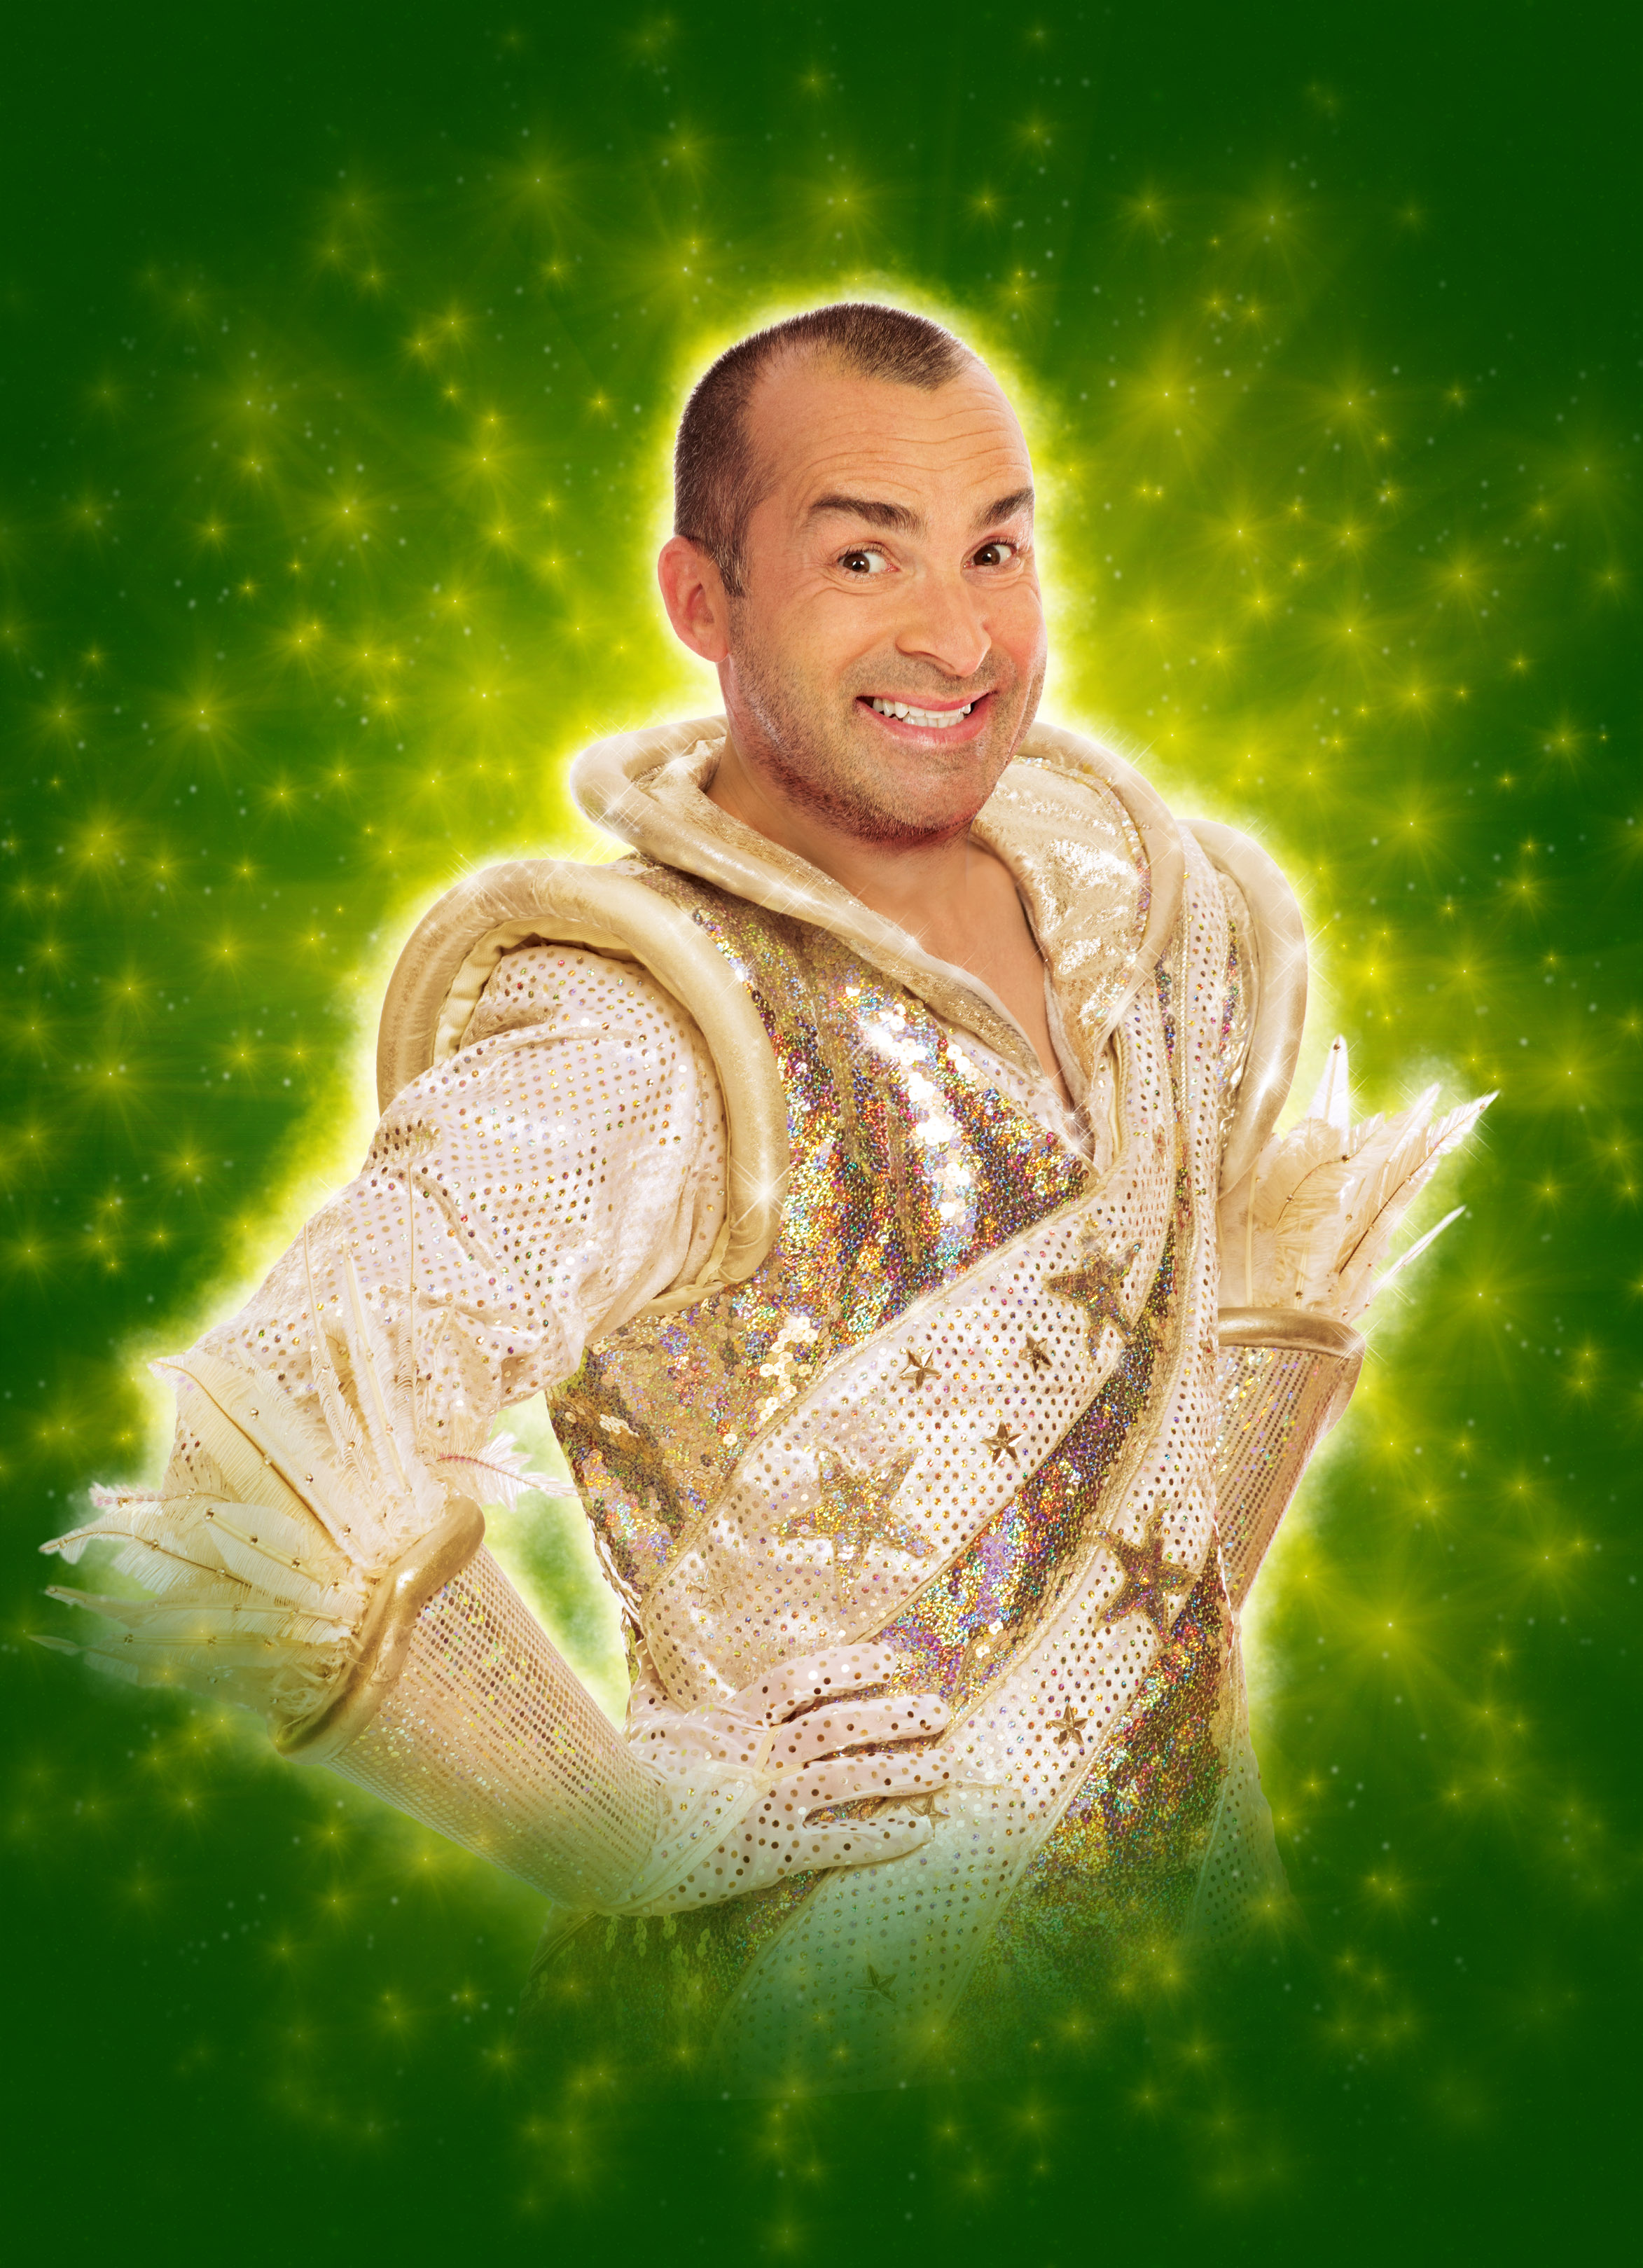 LOUIE SPENCE WILL STAR IN SWINDON'S WYVERN THEATRE PANTOMIME  JACK AND THE BEANSTALK